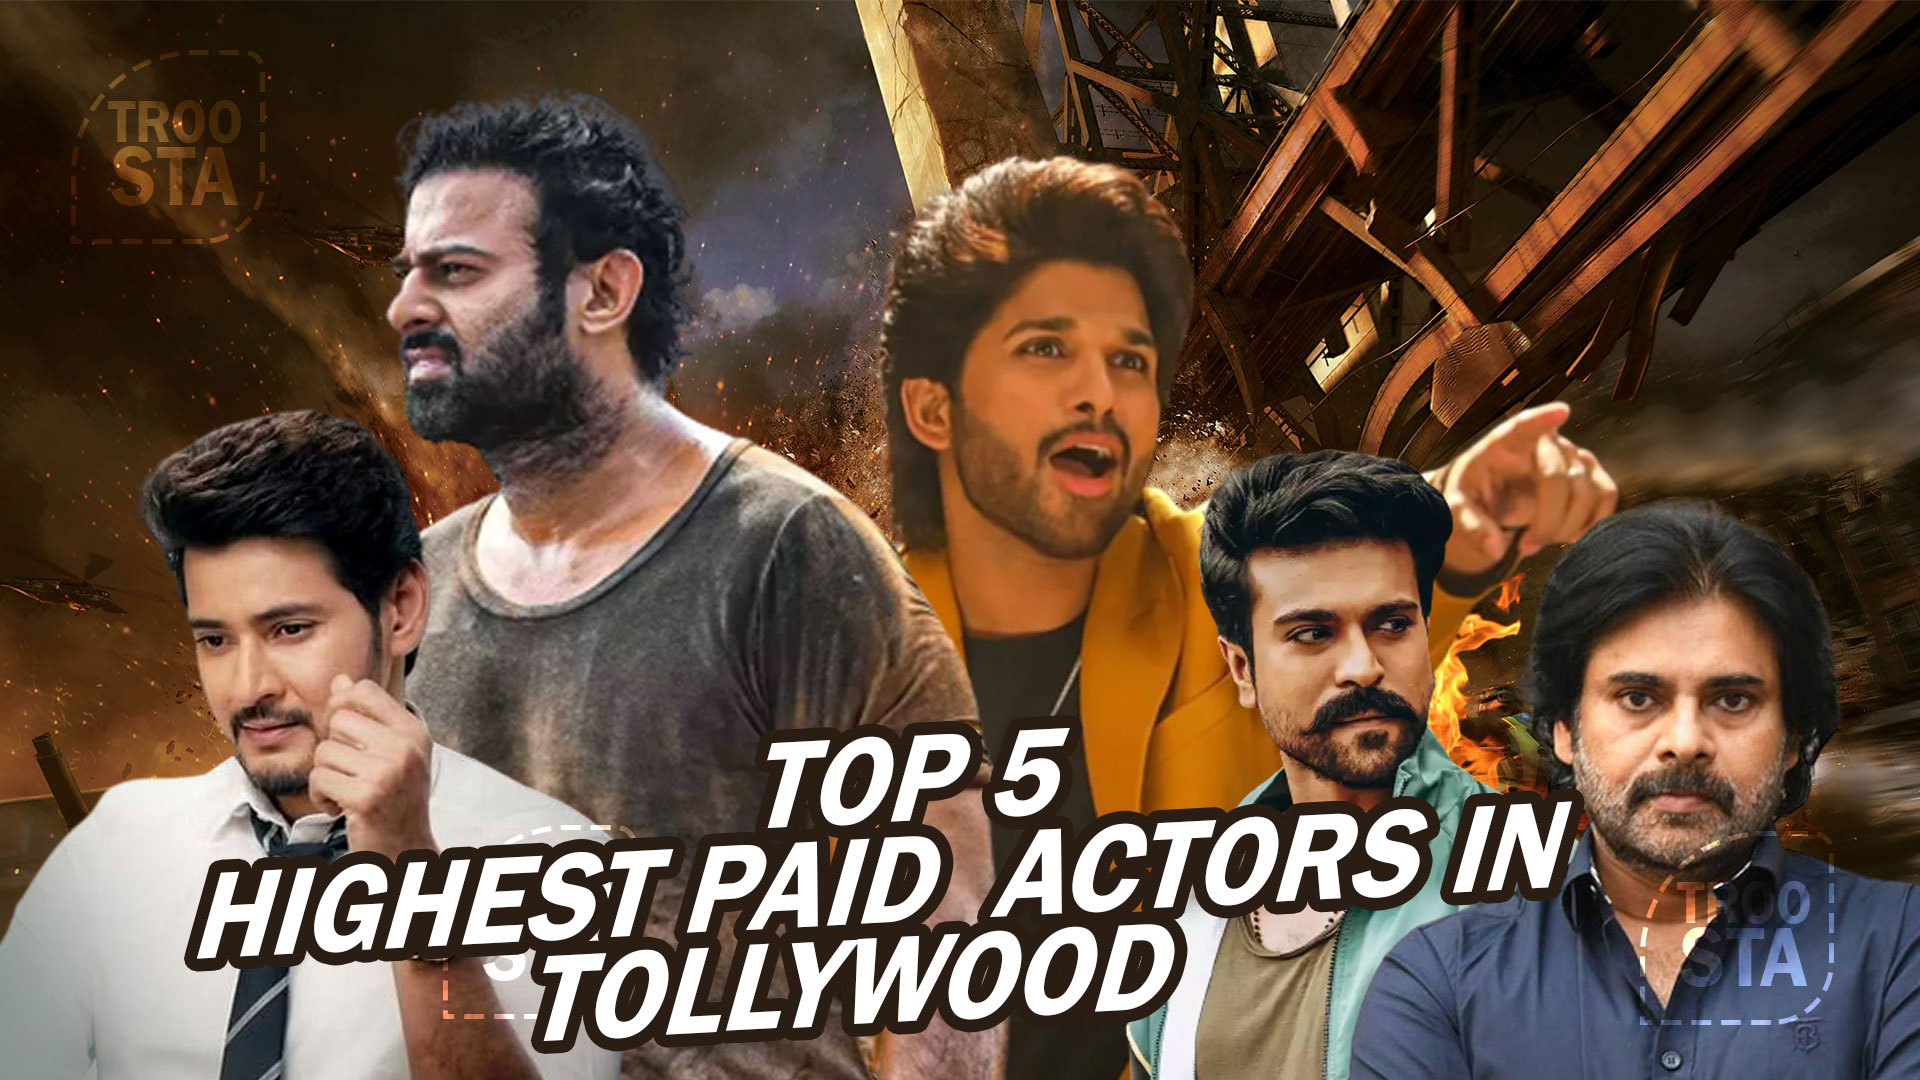 Top 5 Highest Paid Actors In Tollywood